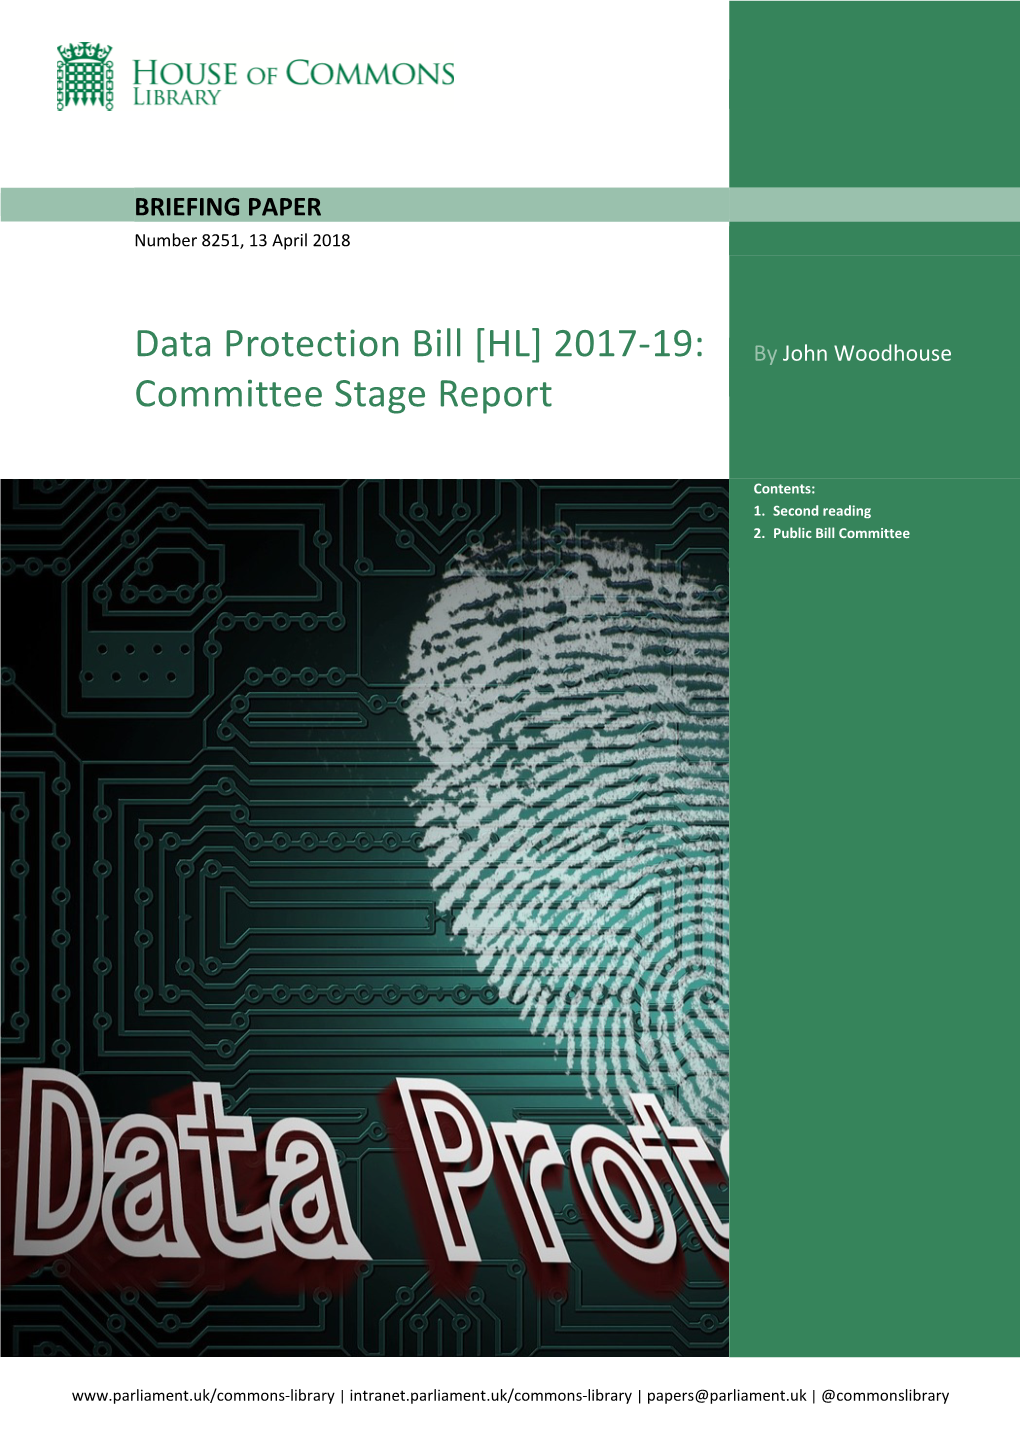 Data Protection Bill [HL] 2017-19: by John Woodhouse